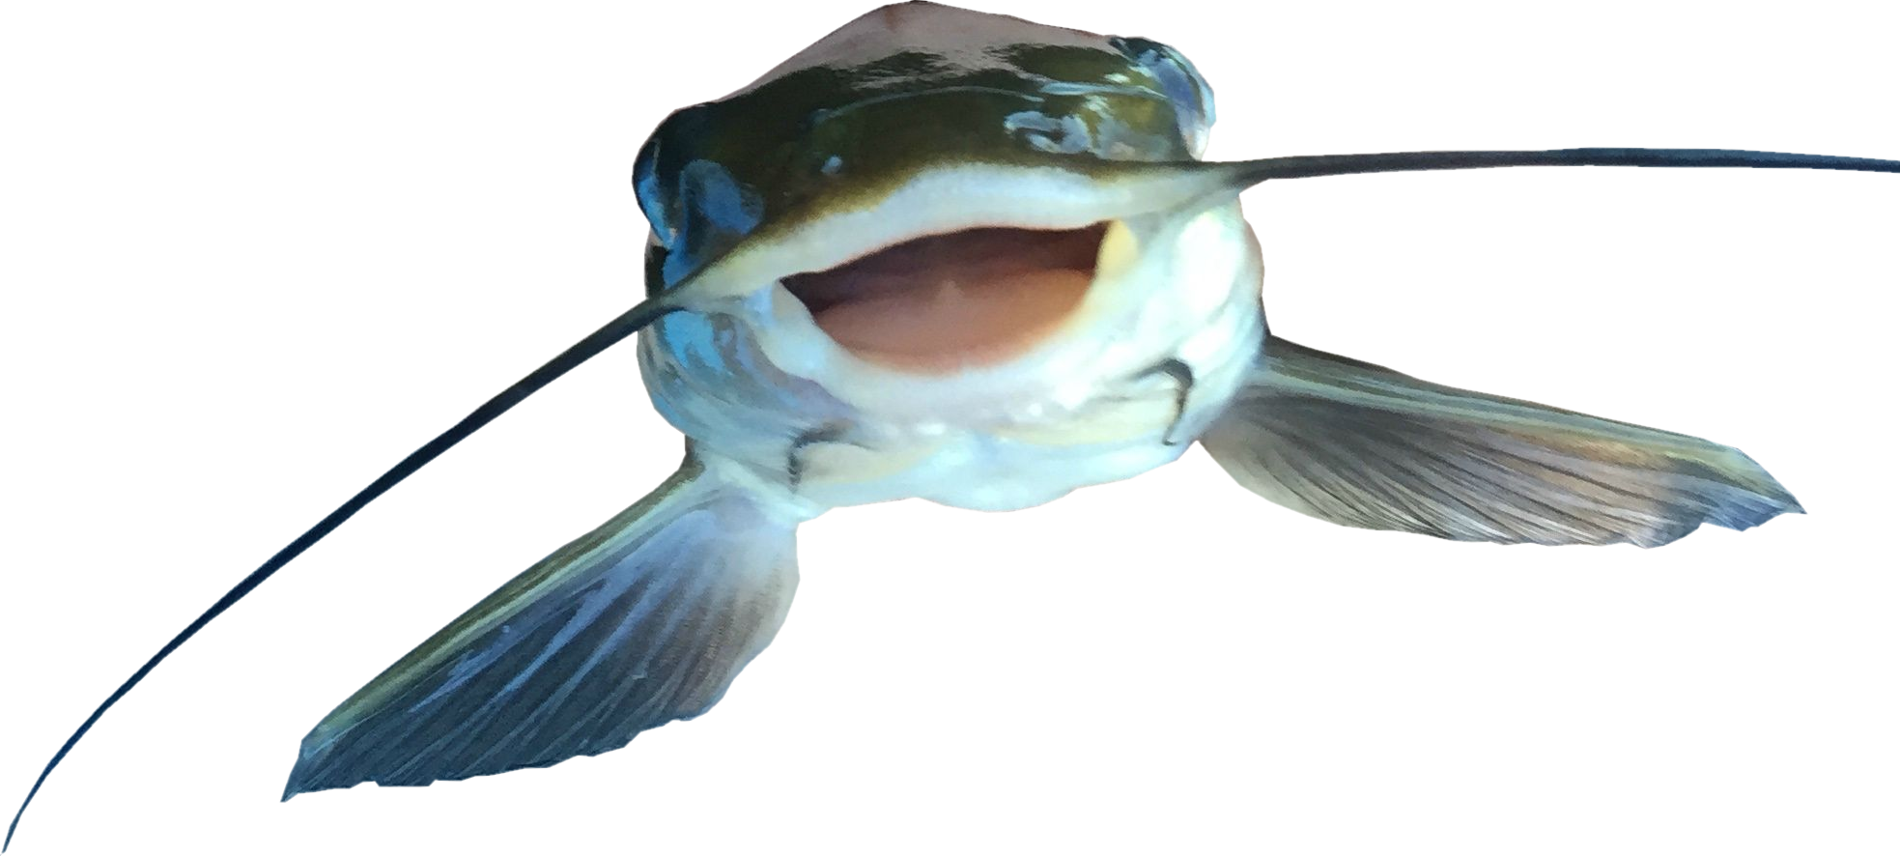 A Fish With A Mouth Open